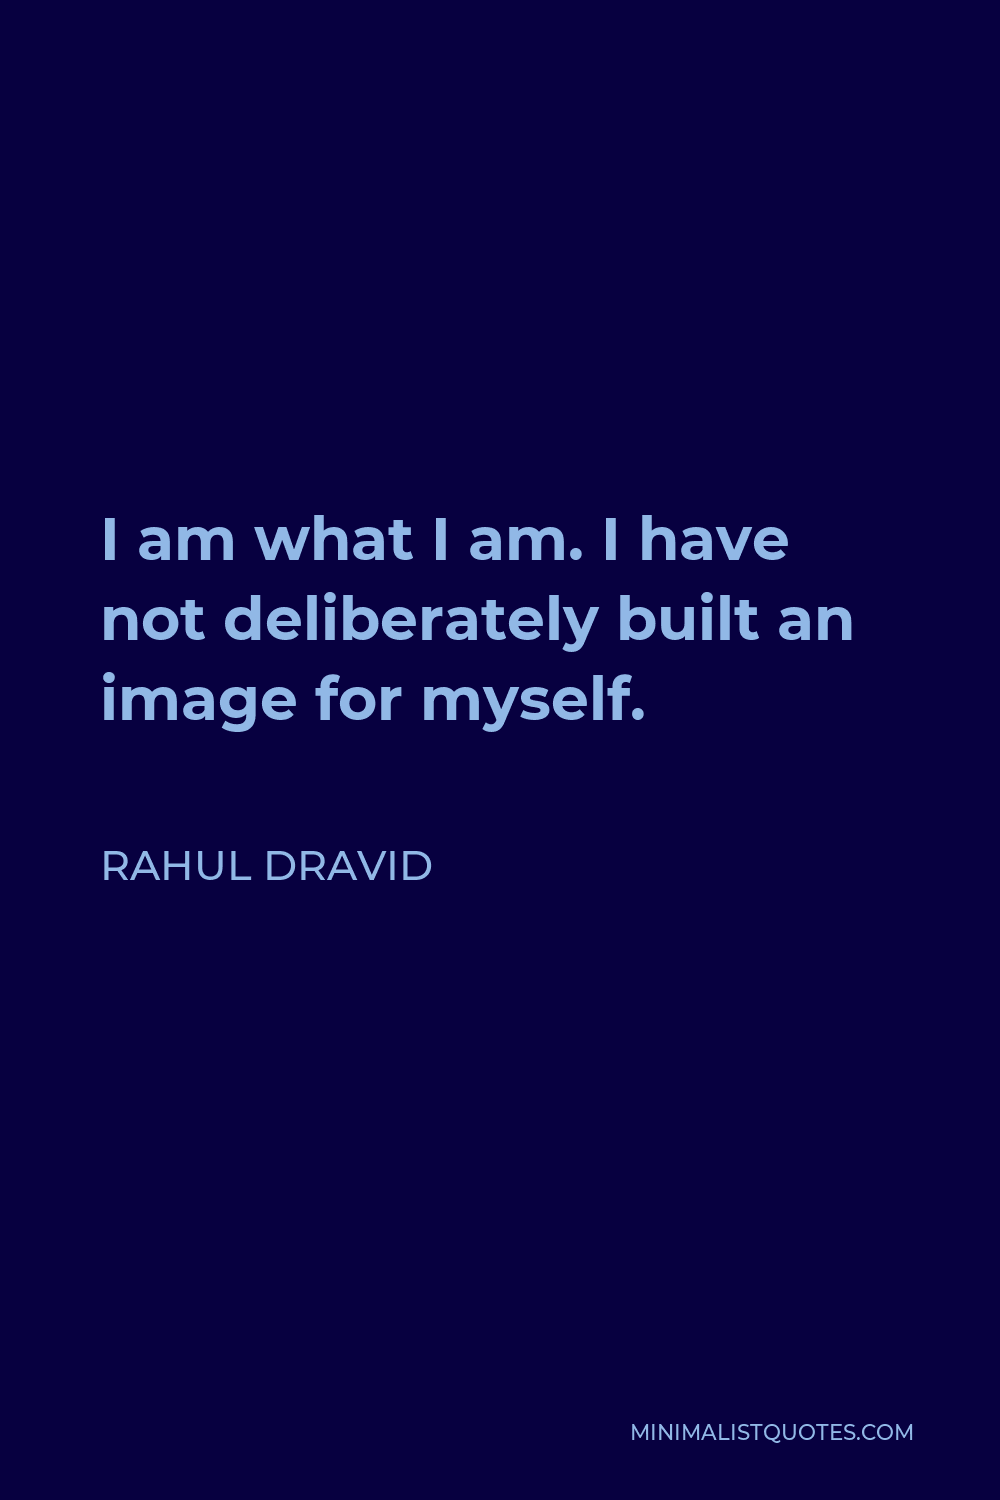 Rahul Dravid Quote - I am what I am. I have not deliberately built an image for myself.